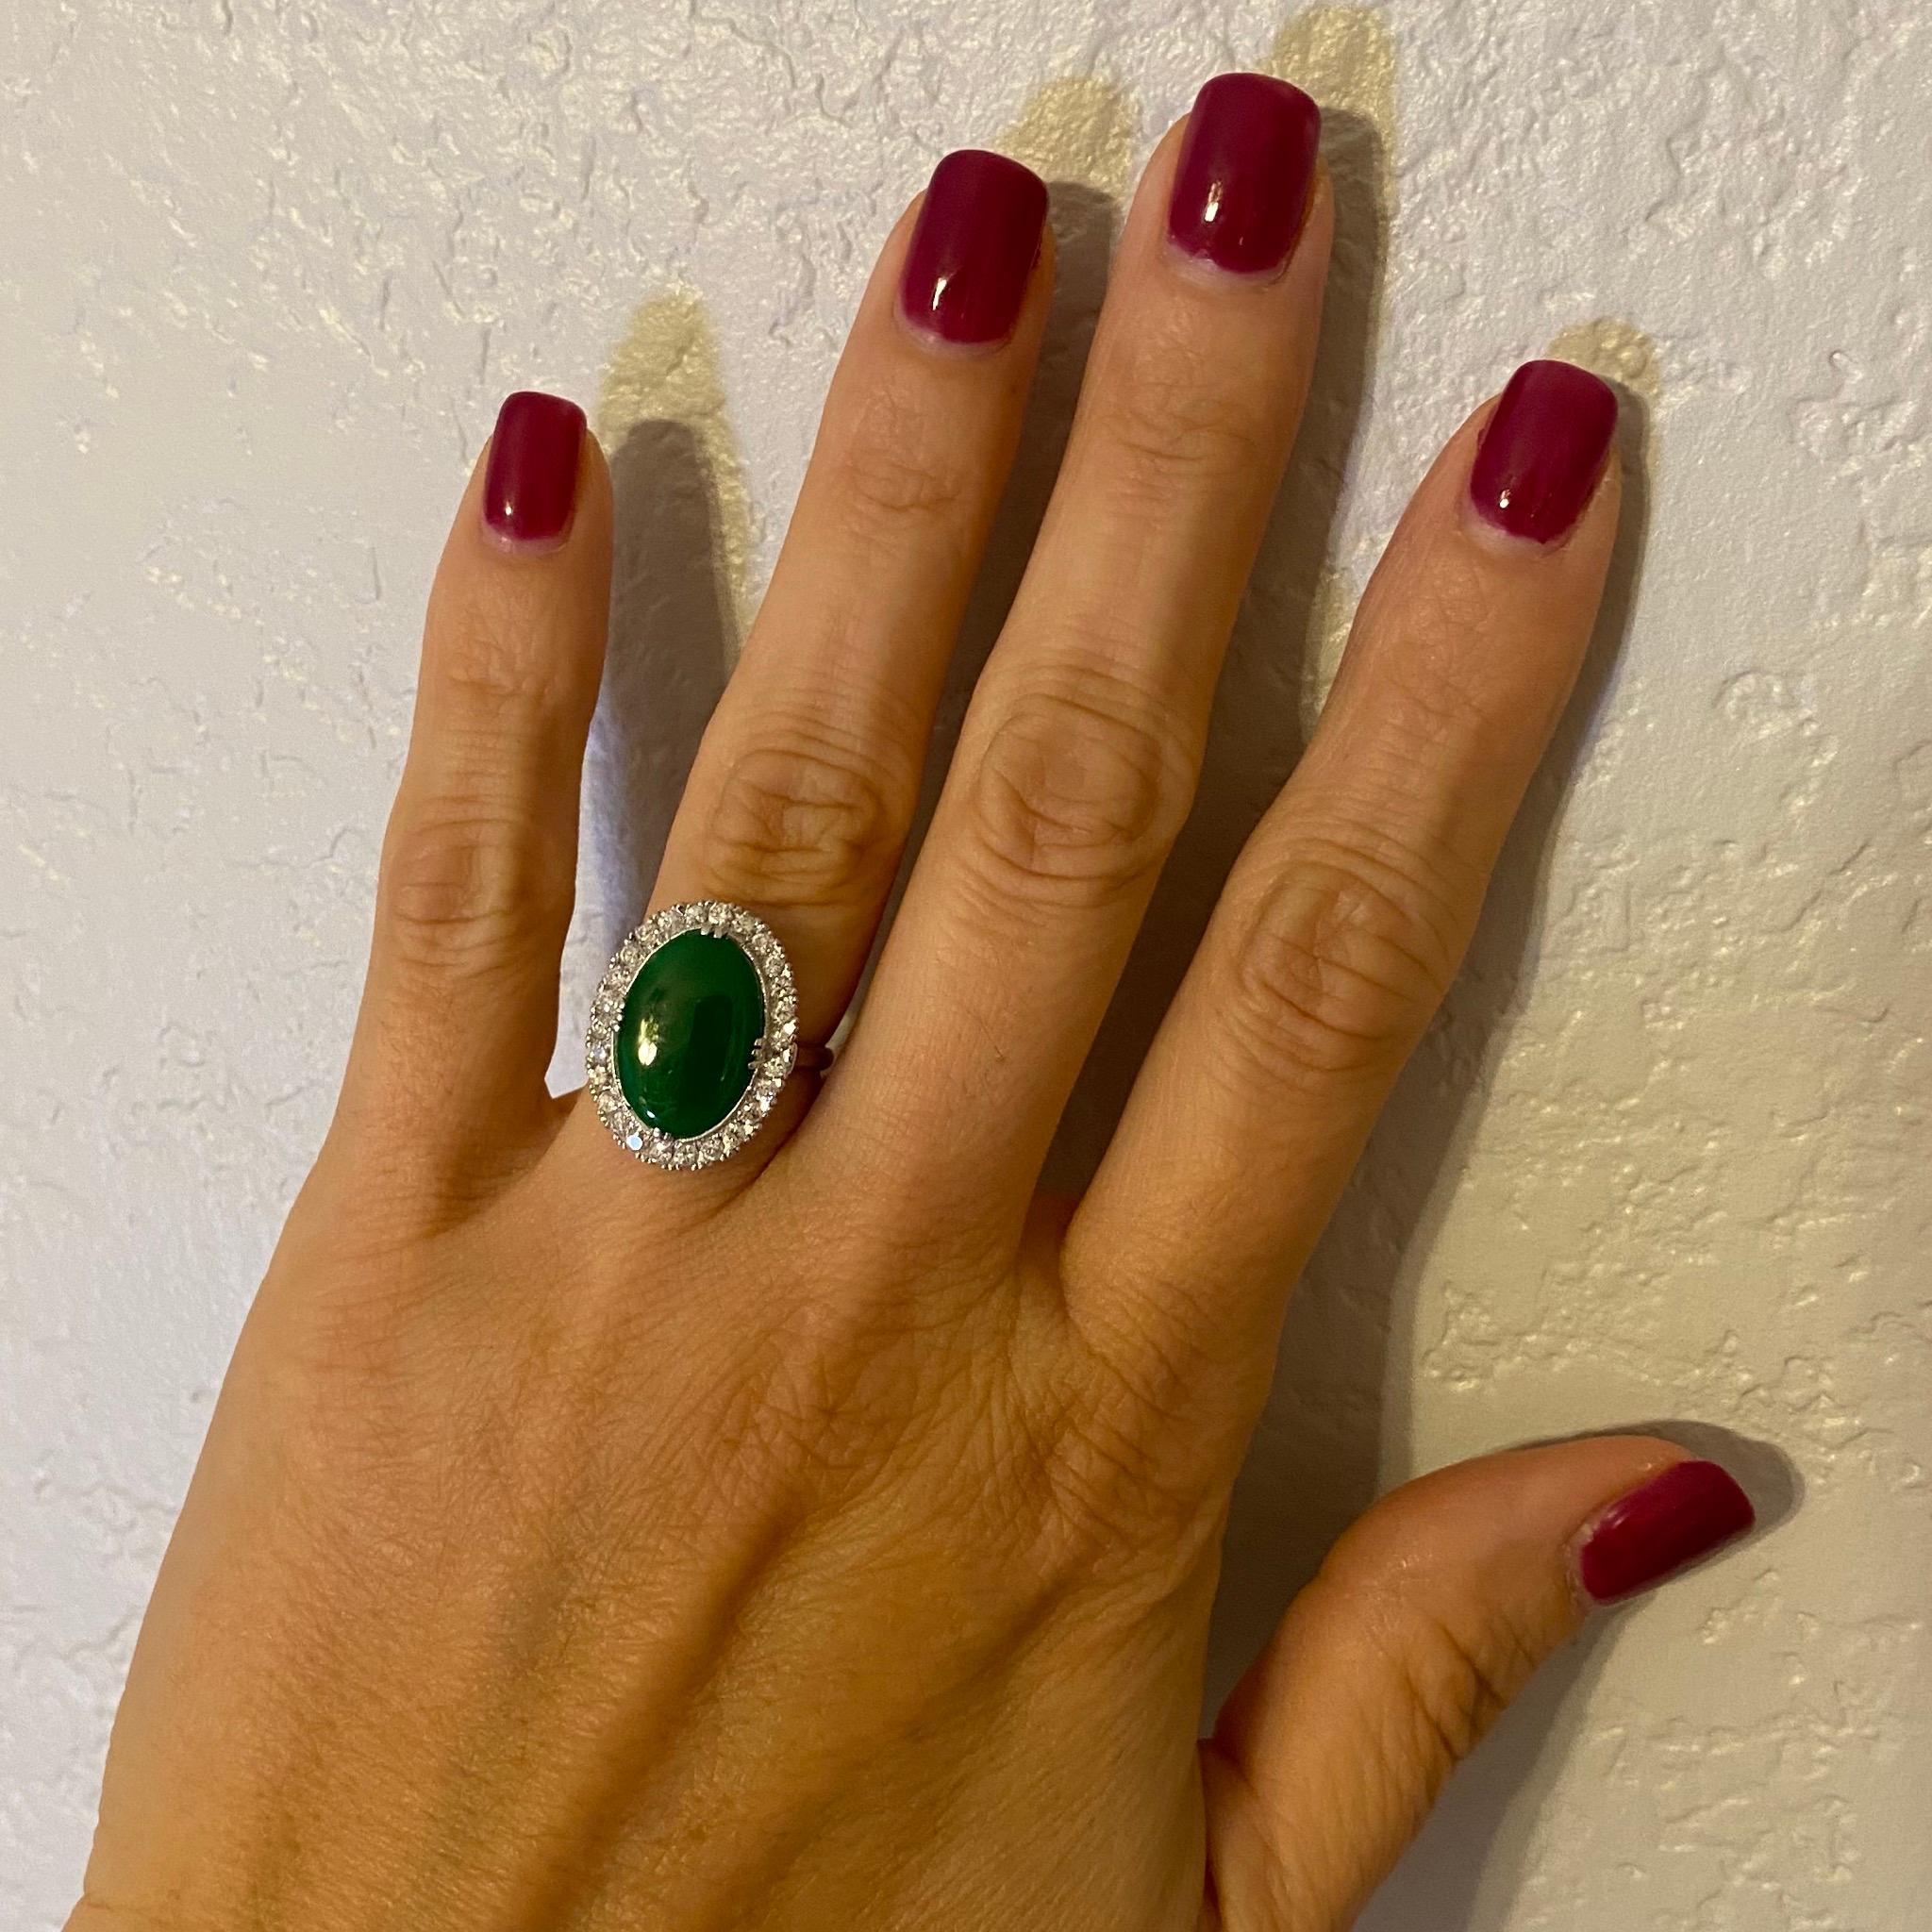 Simply Beautiful finely detailed Art Deco Cocktail Ring, center set with a securely nestled 9 Carat oval Jade surrounded by 26 Diamonds, weighing approx. 0.80 total Carat weight. Hand crafted Platinum mounting. Approx. Dimensions: 21mm x 15.8mm face